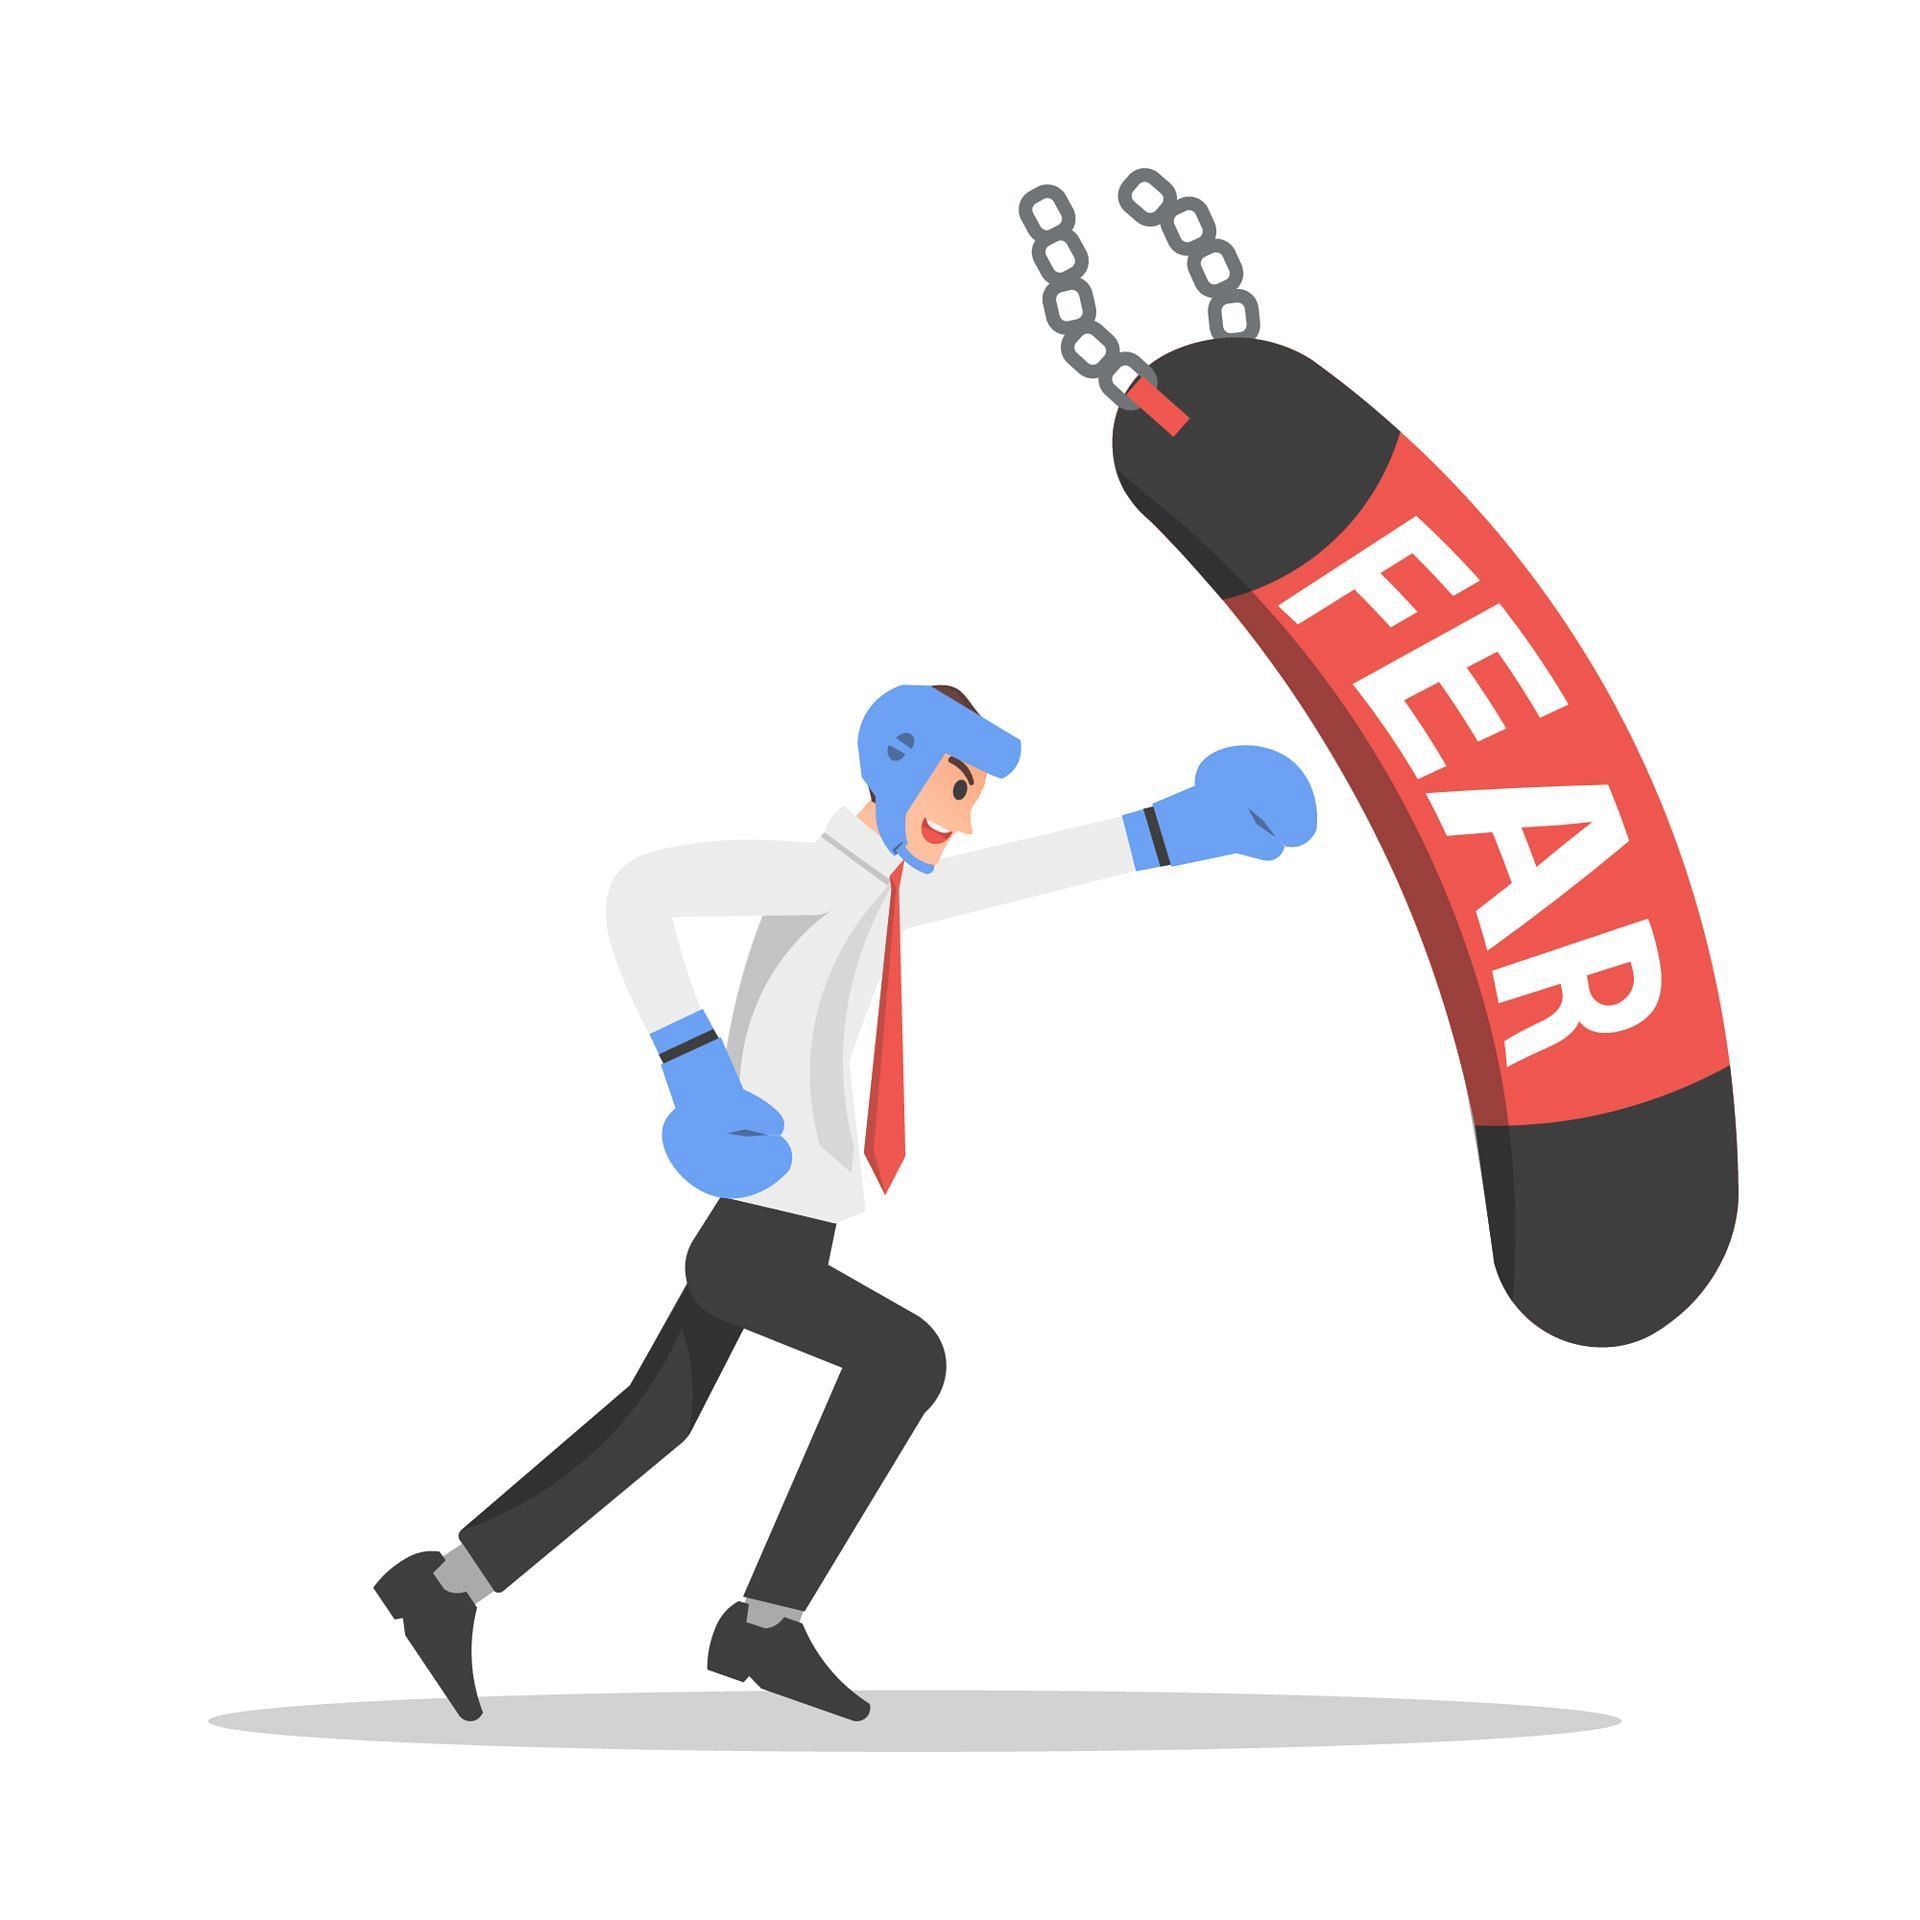 We have our own share of fears but we can learn to deal with them. (Image via Vecteezy/ Prihanto Sanjaya)